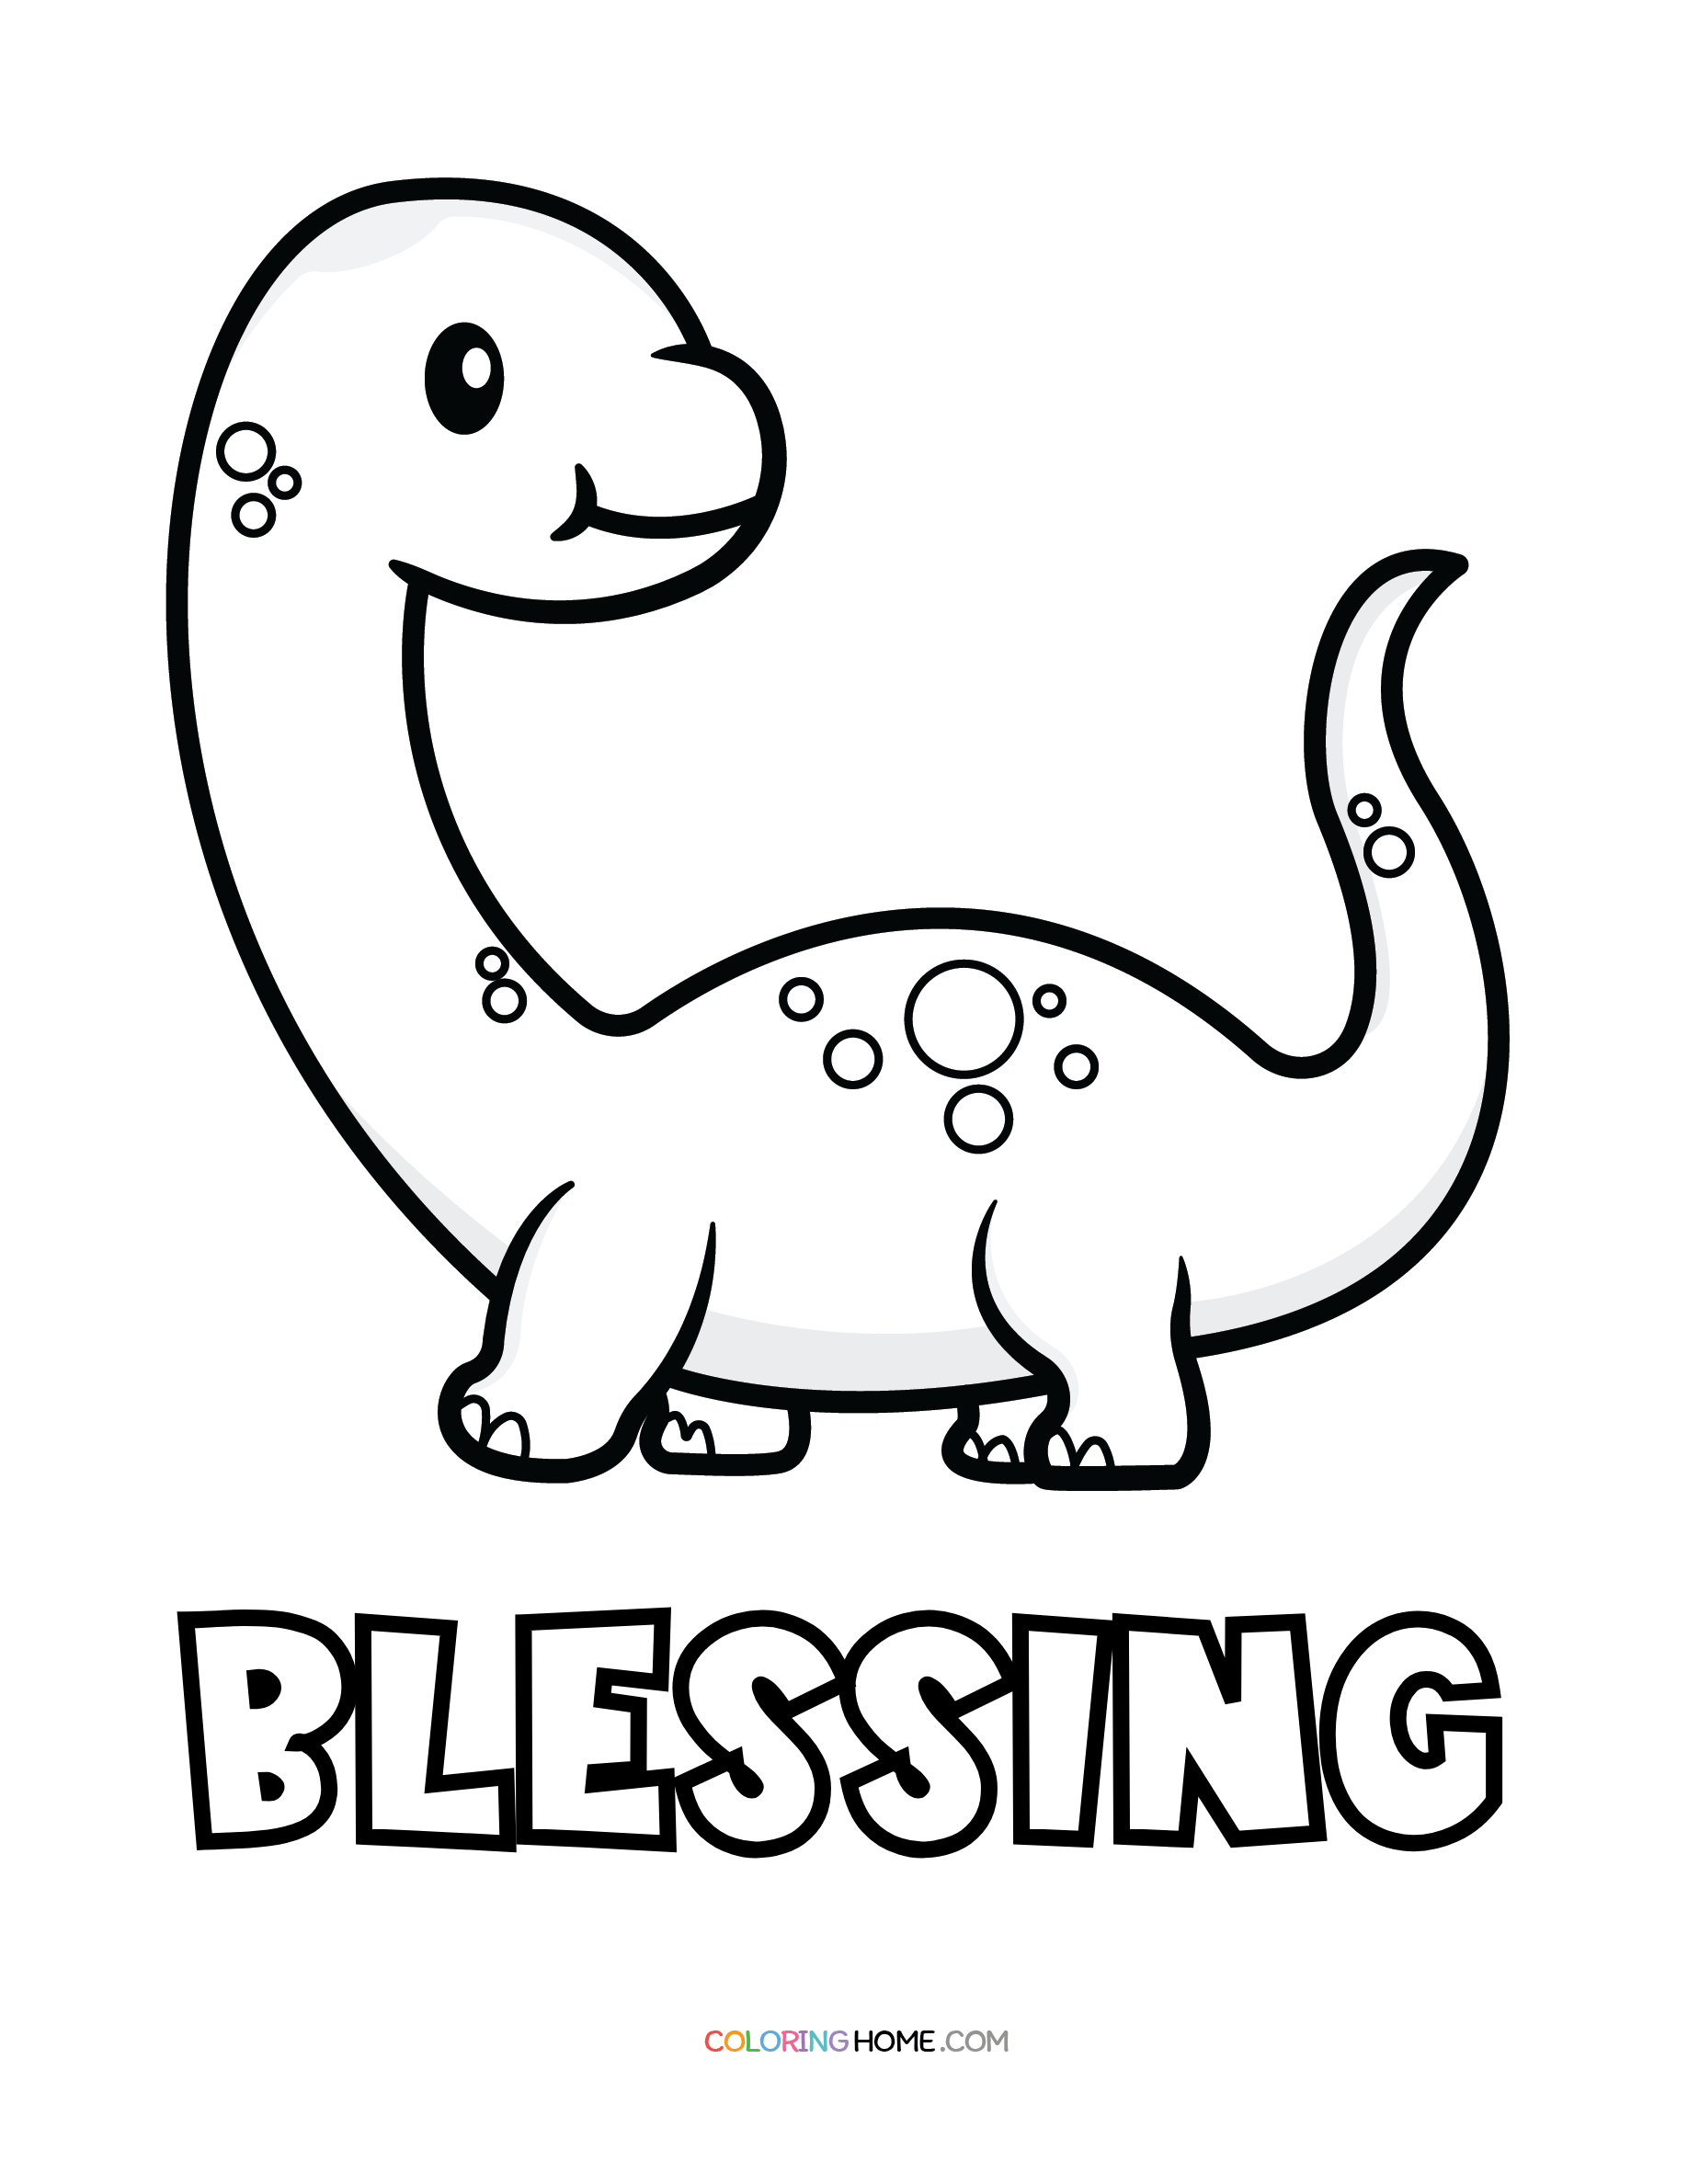 Blessing dinosaur coloring page